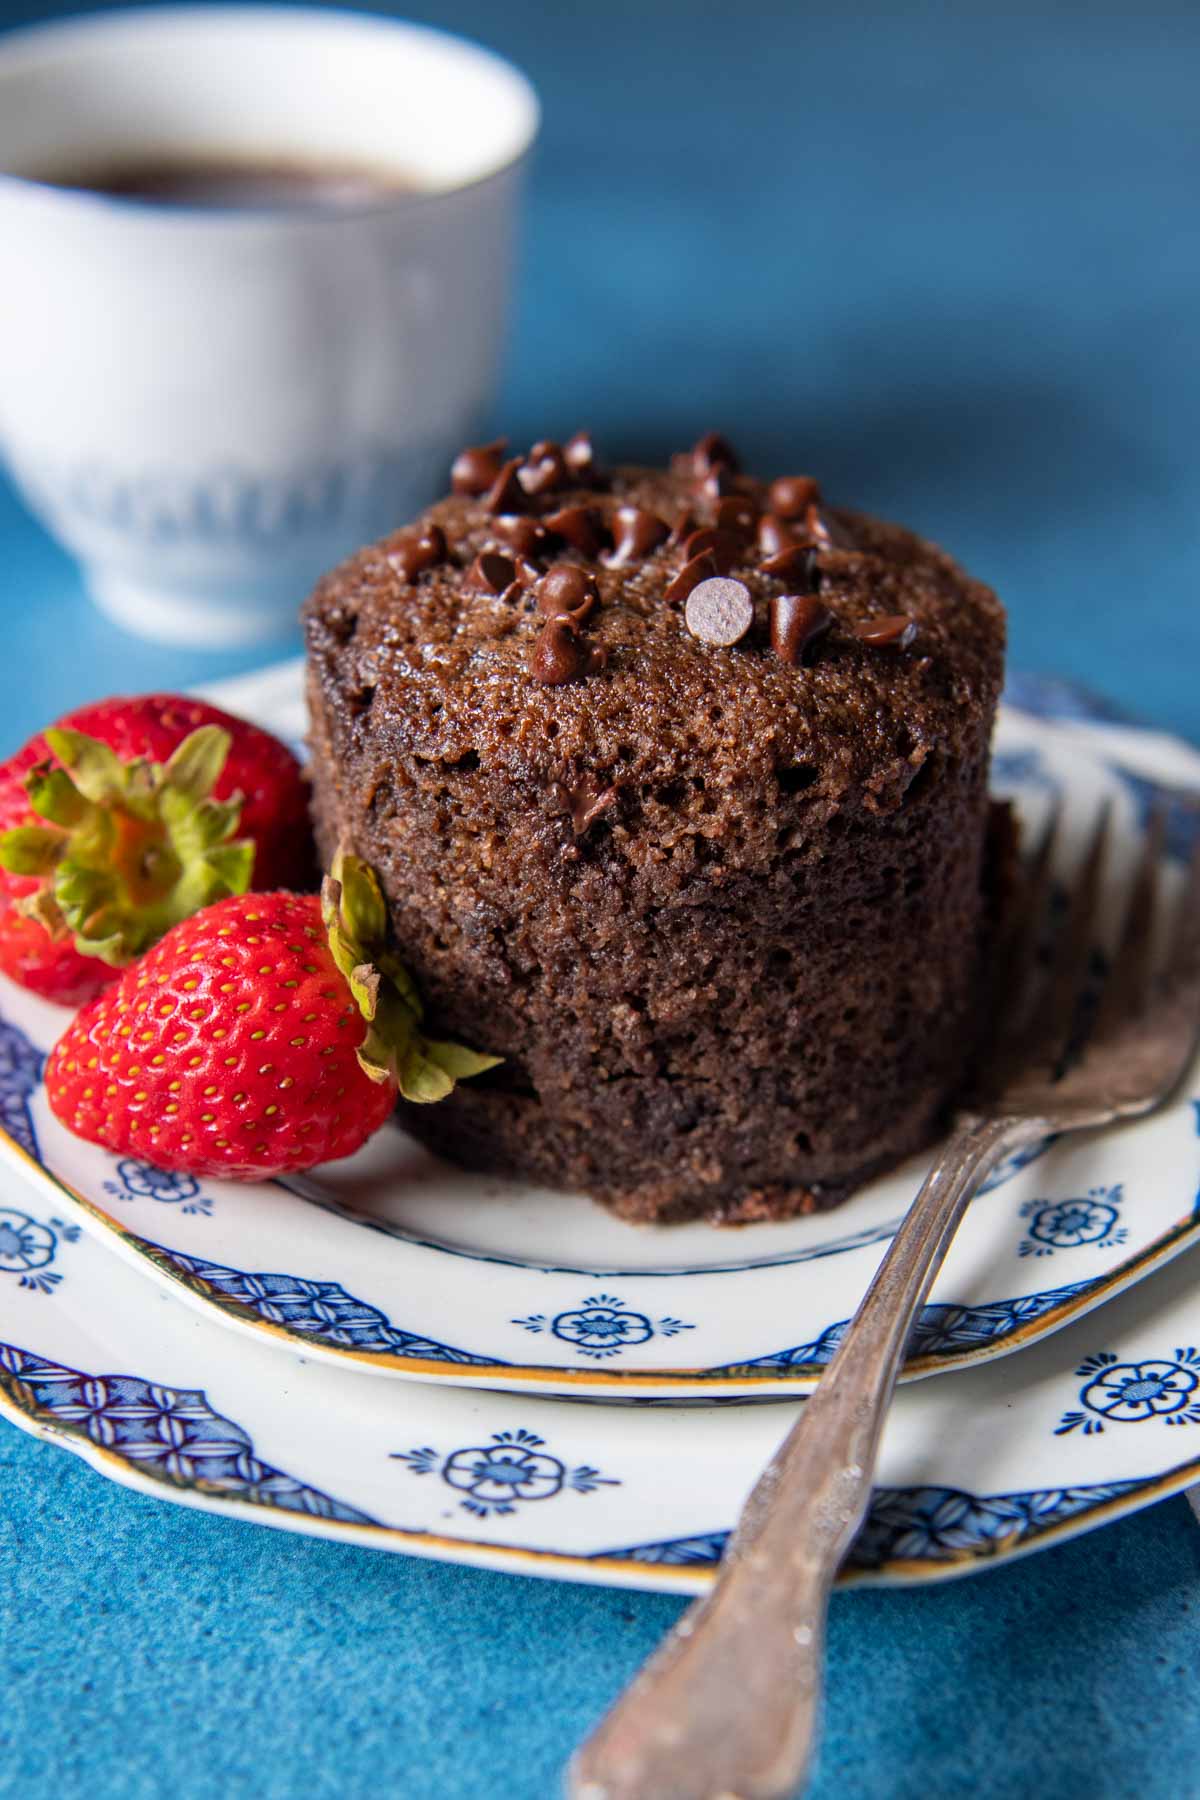 a mug cake taken out of the mug and placed on a plate with a fork nearby.